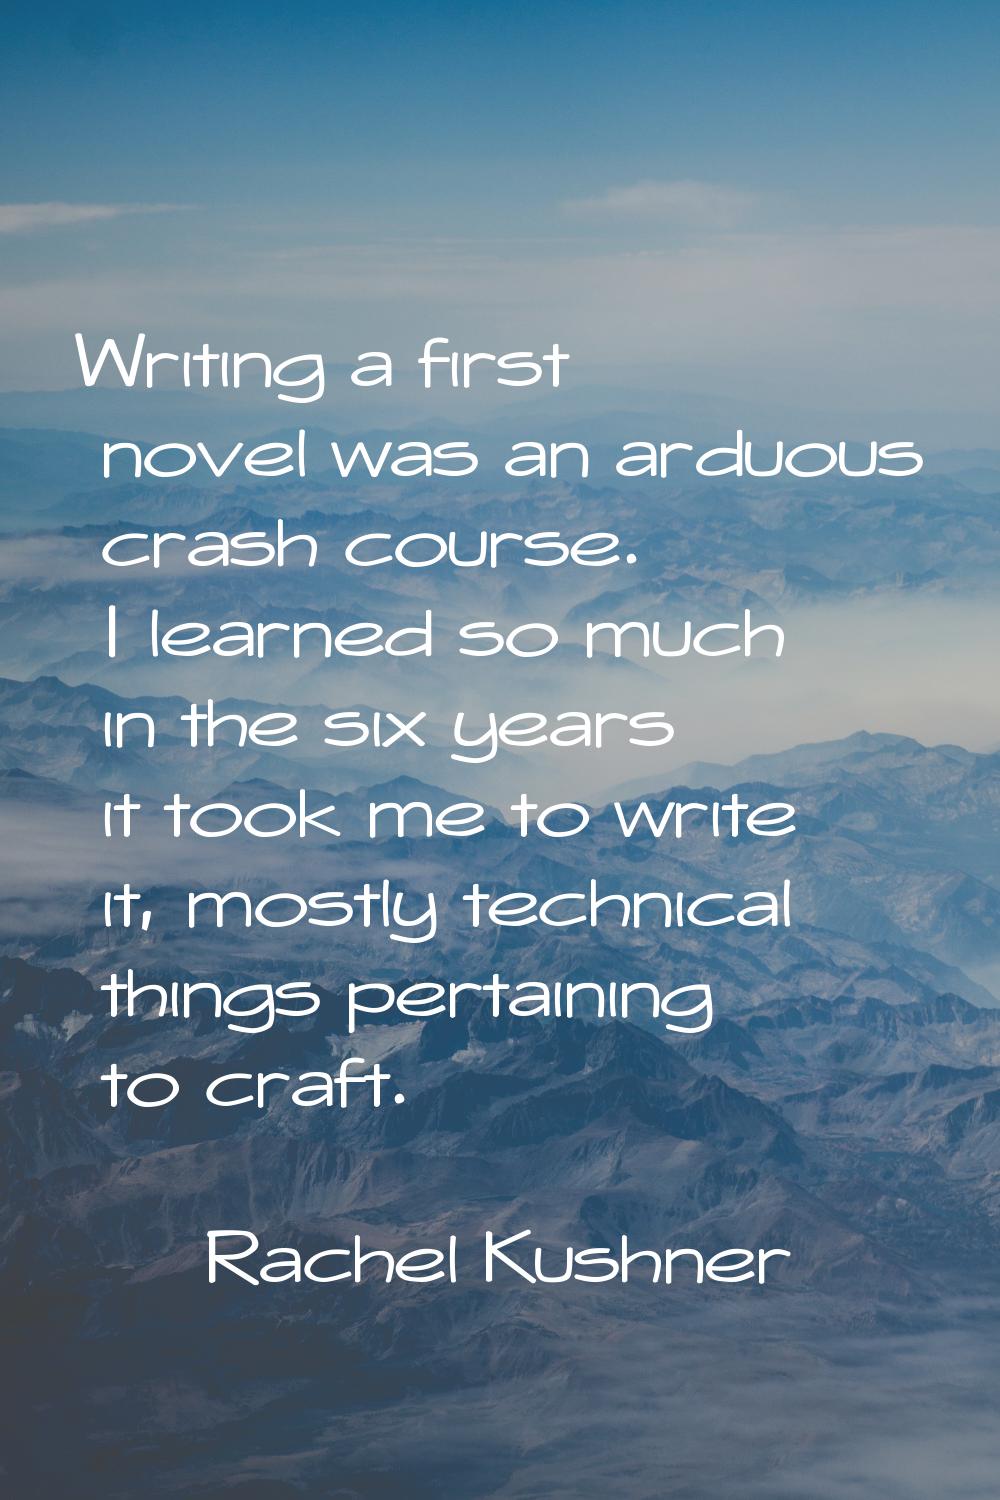 Writing a first novel was an arduous crash course. I learned so much in the six years it took me to